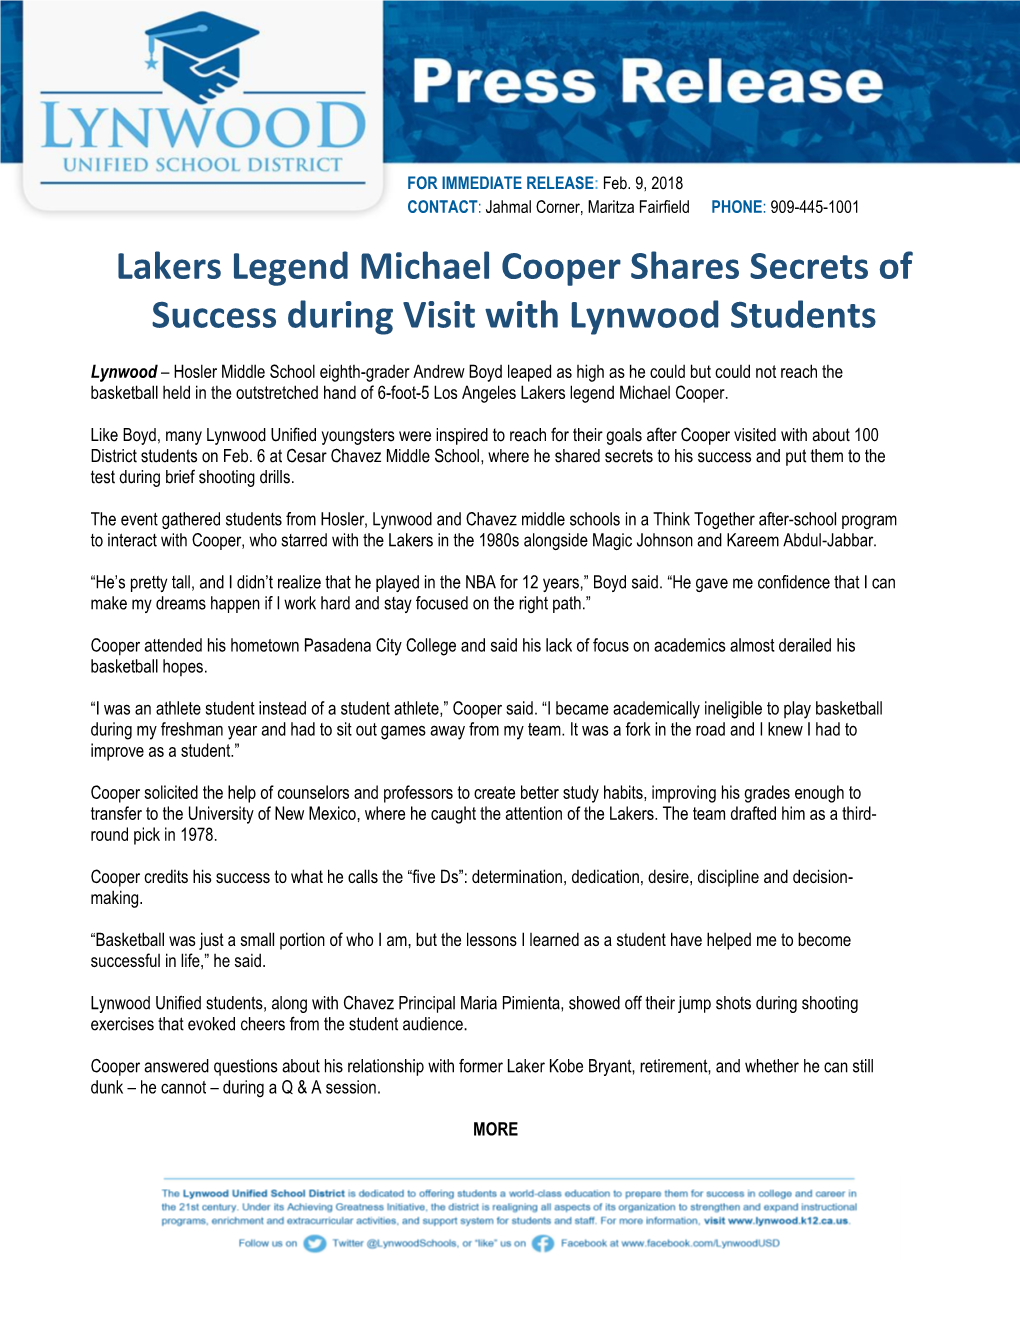 Lakers Legend Michael Cooper Shares Secrets of Success During Visit with Lynwood Students